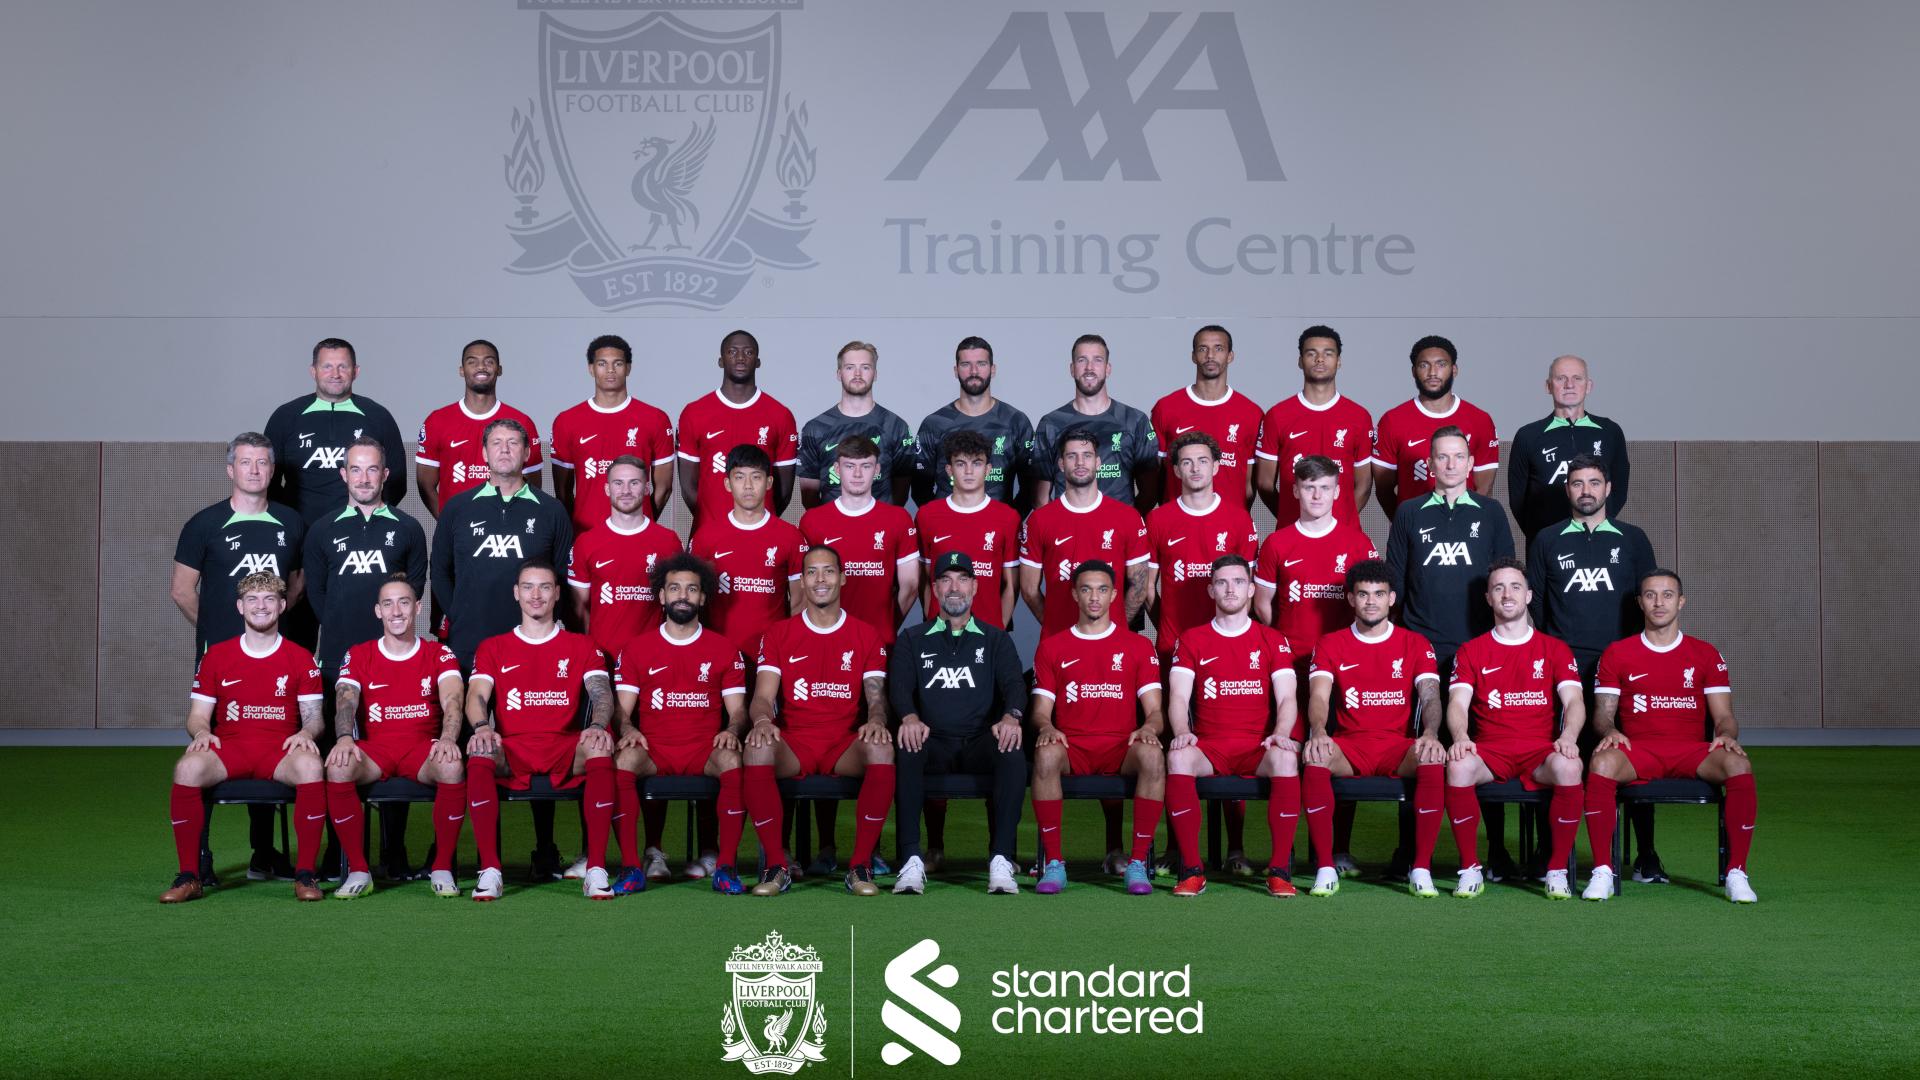 Jurgen Klopp's last team at Liverpool Football Club. We need another one of these at the end of the season.